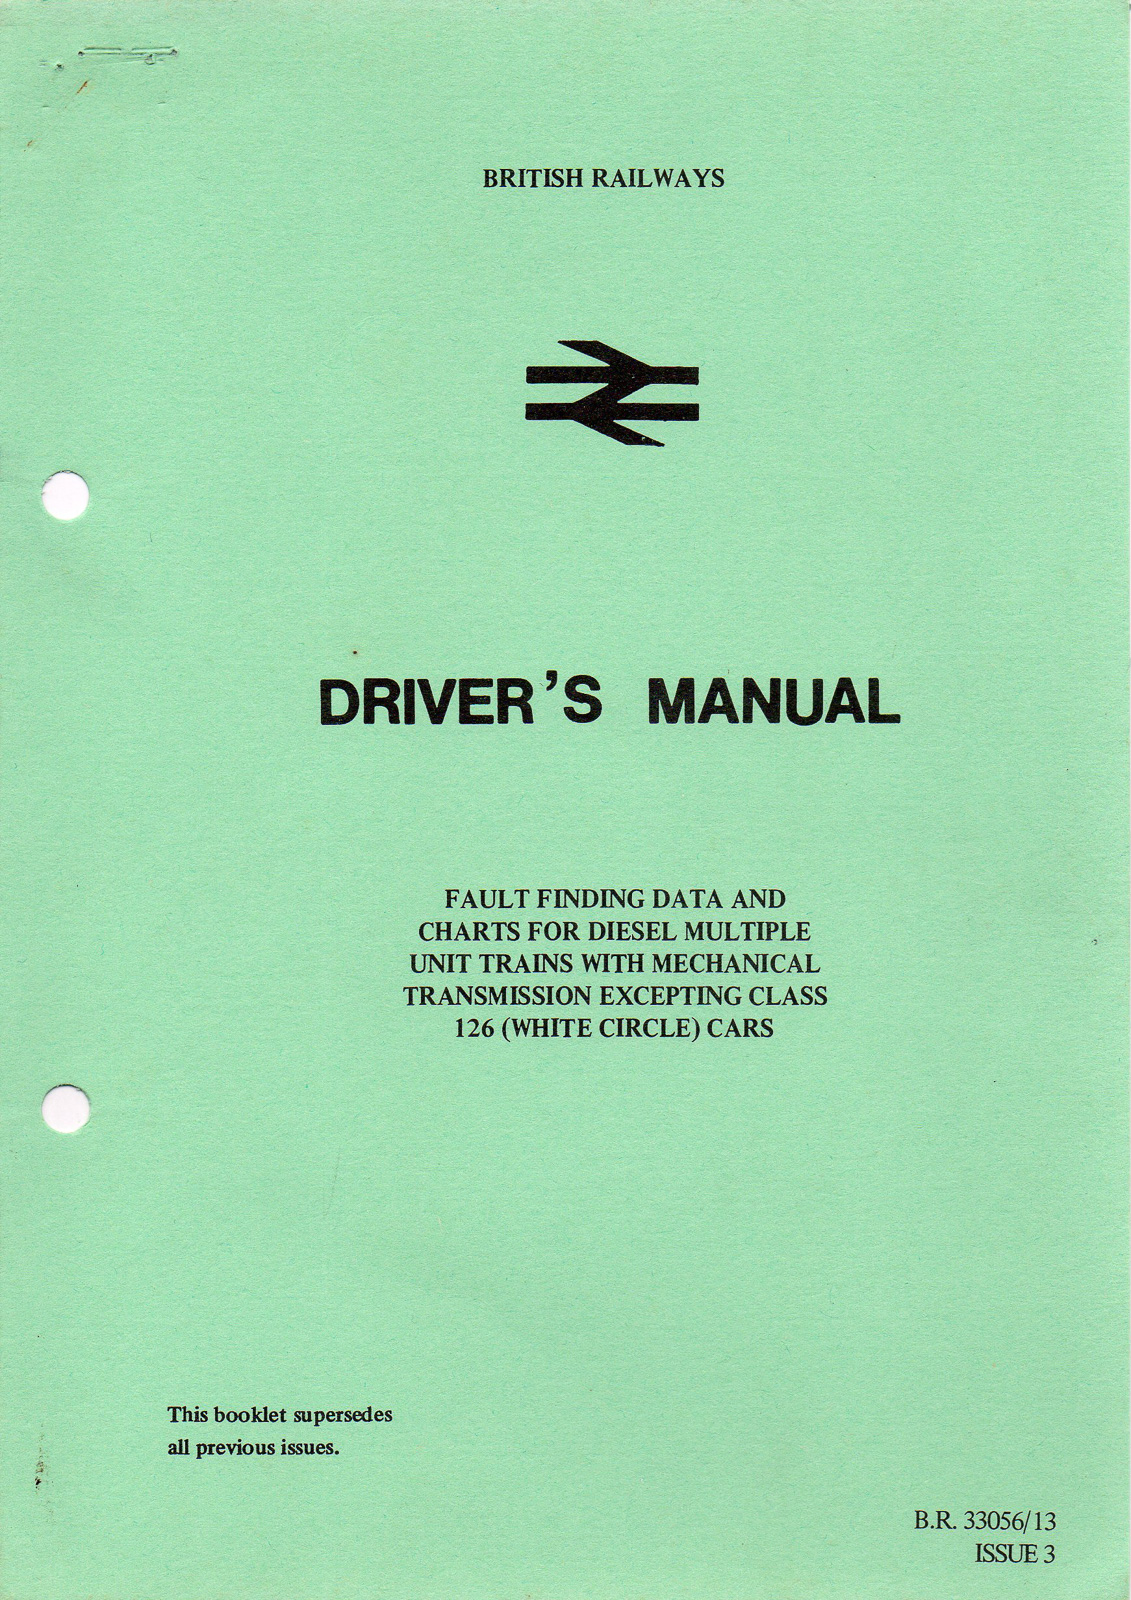 DMU drivers manual 33056-13 issue 3